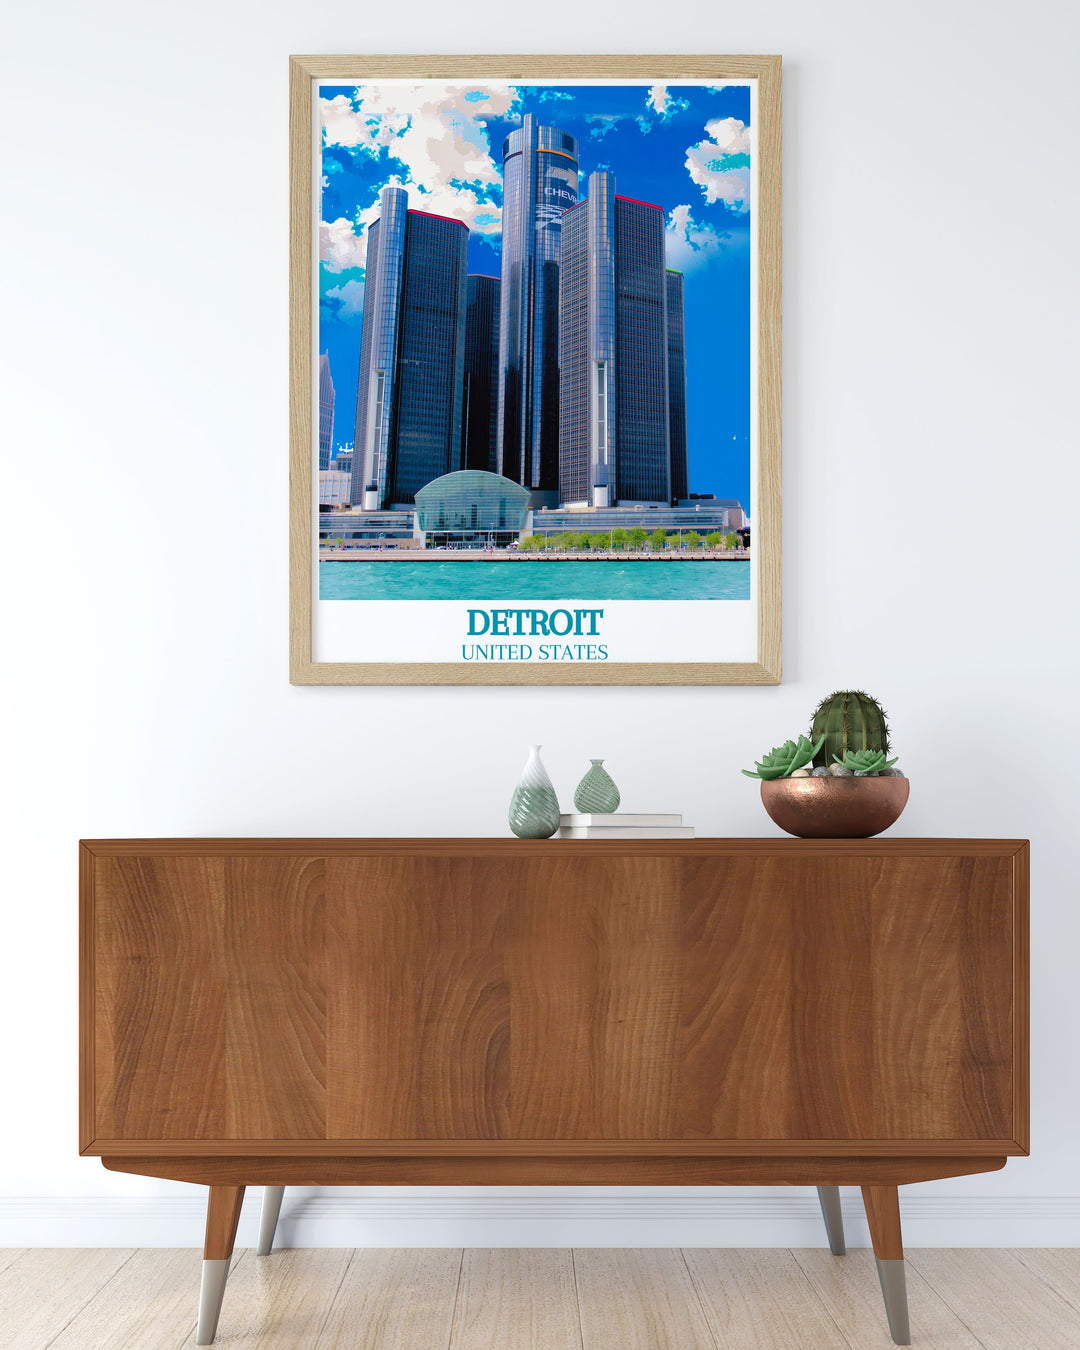 Vintage poster highlighting the historical charm of Detroit, featuring the citys vibrant neighborhoods and cultural landmarks.